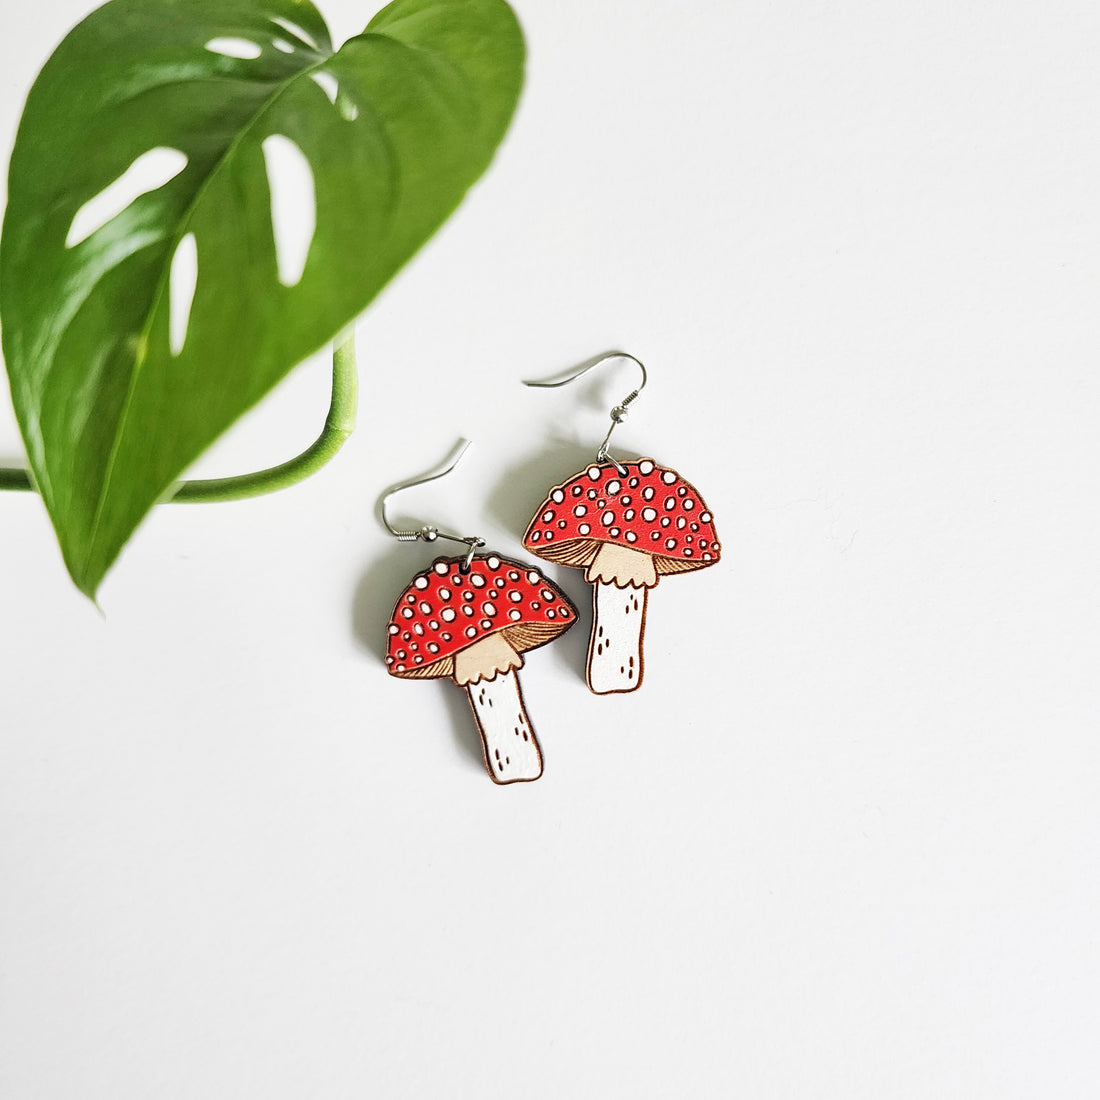 pair of mushroom earrings on a white background next to a leaf